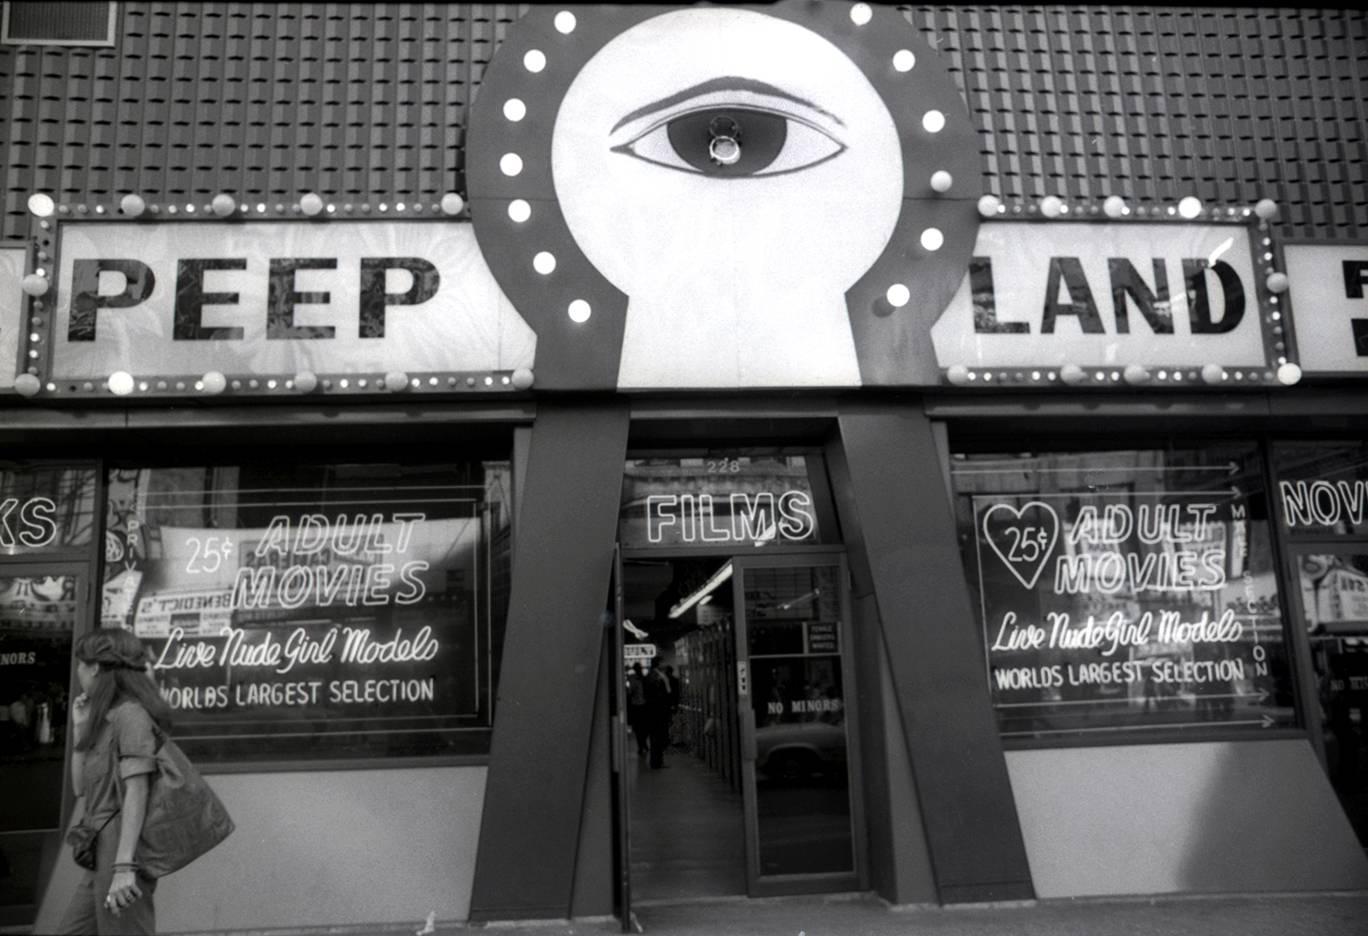 Fernando Natalici Black and White Photograph - "Peep Land" 1970s Times Square New York photograph (70s NY street photography) 